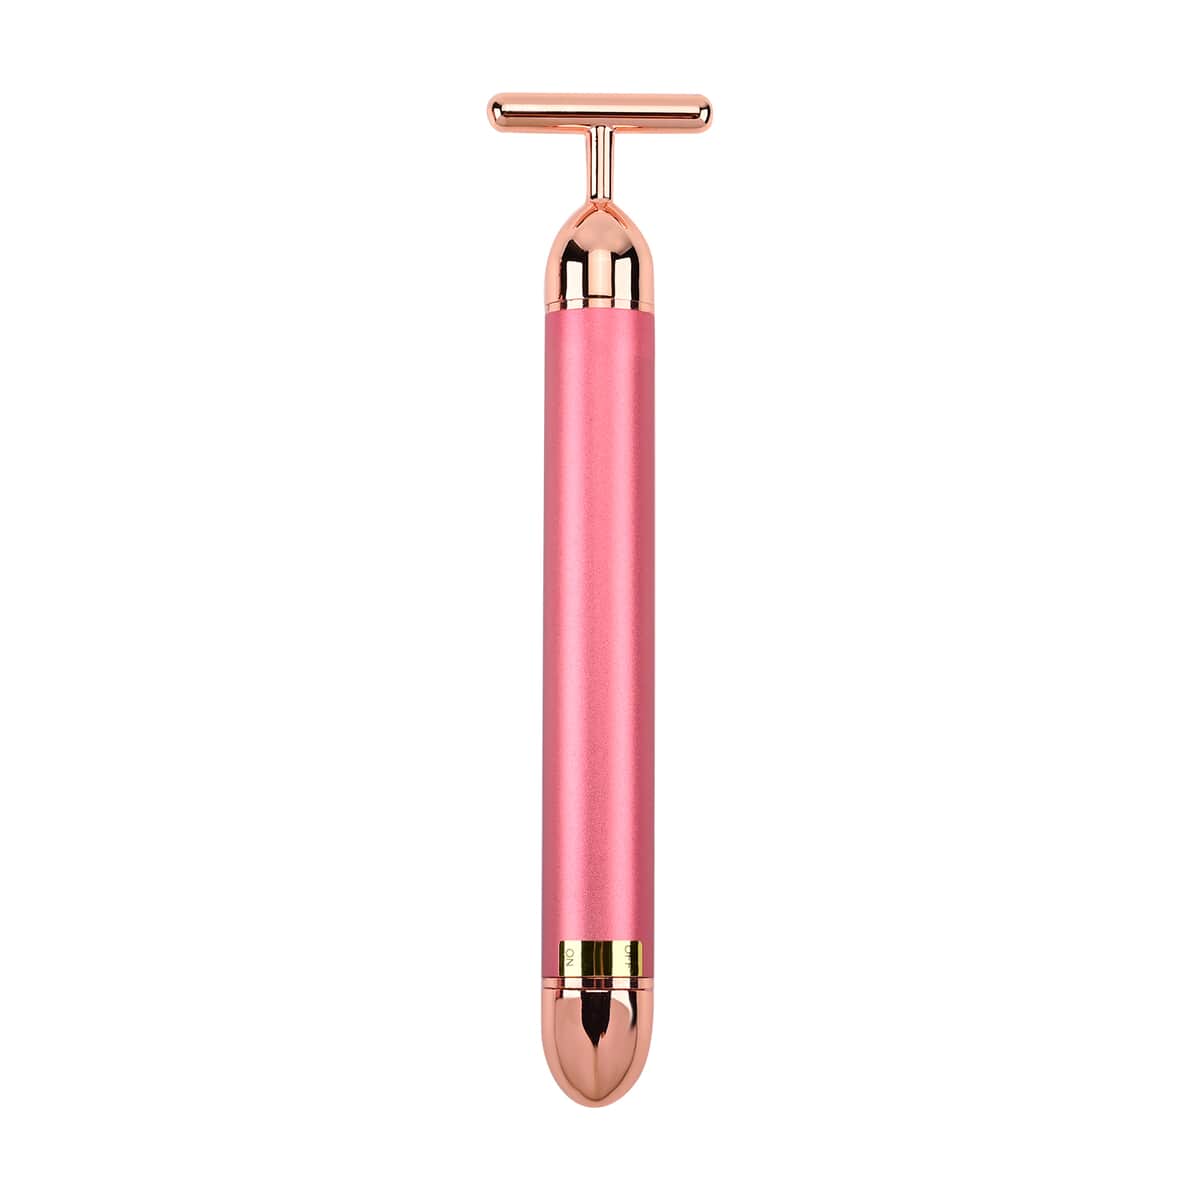 4-in-1 Face Massager Rollers with Four Interchangeable Massage Heads - Rose Gold, 1xAA Battery Not Including image number 4